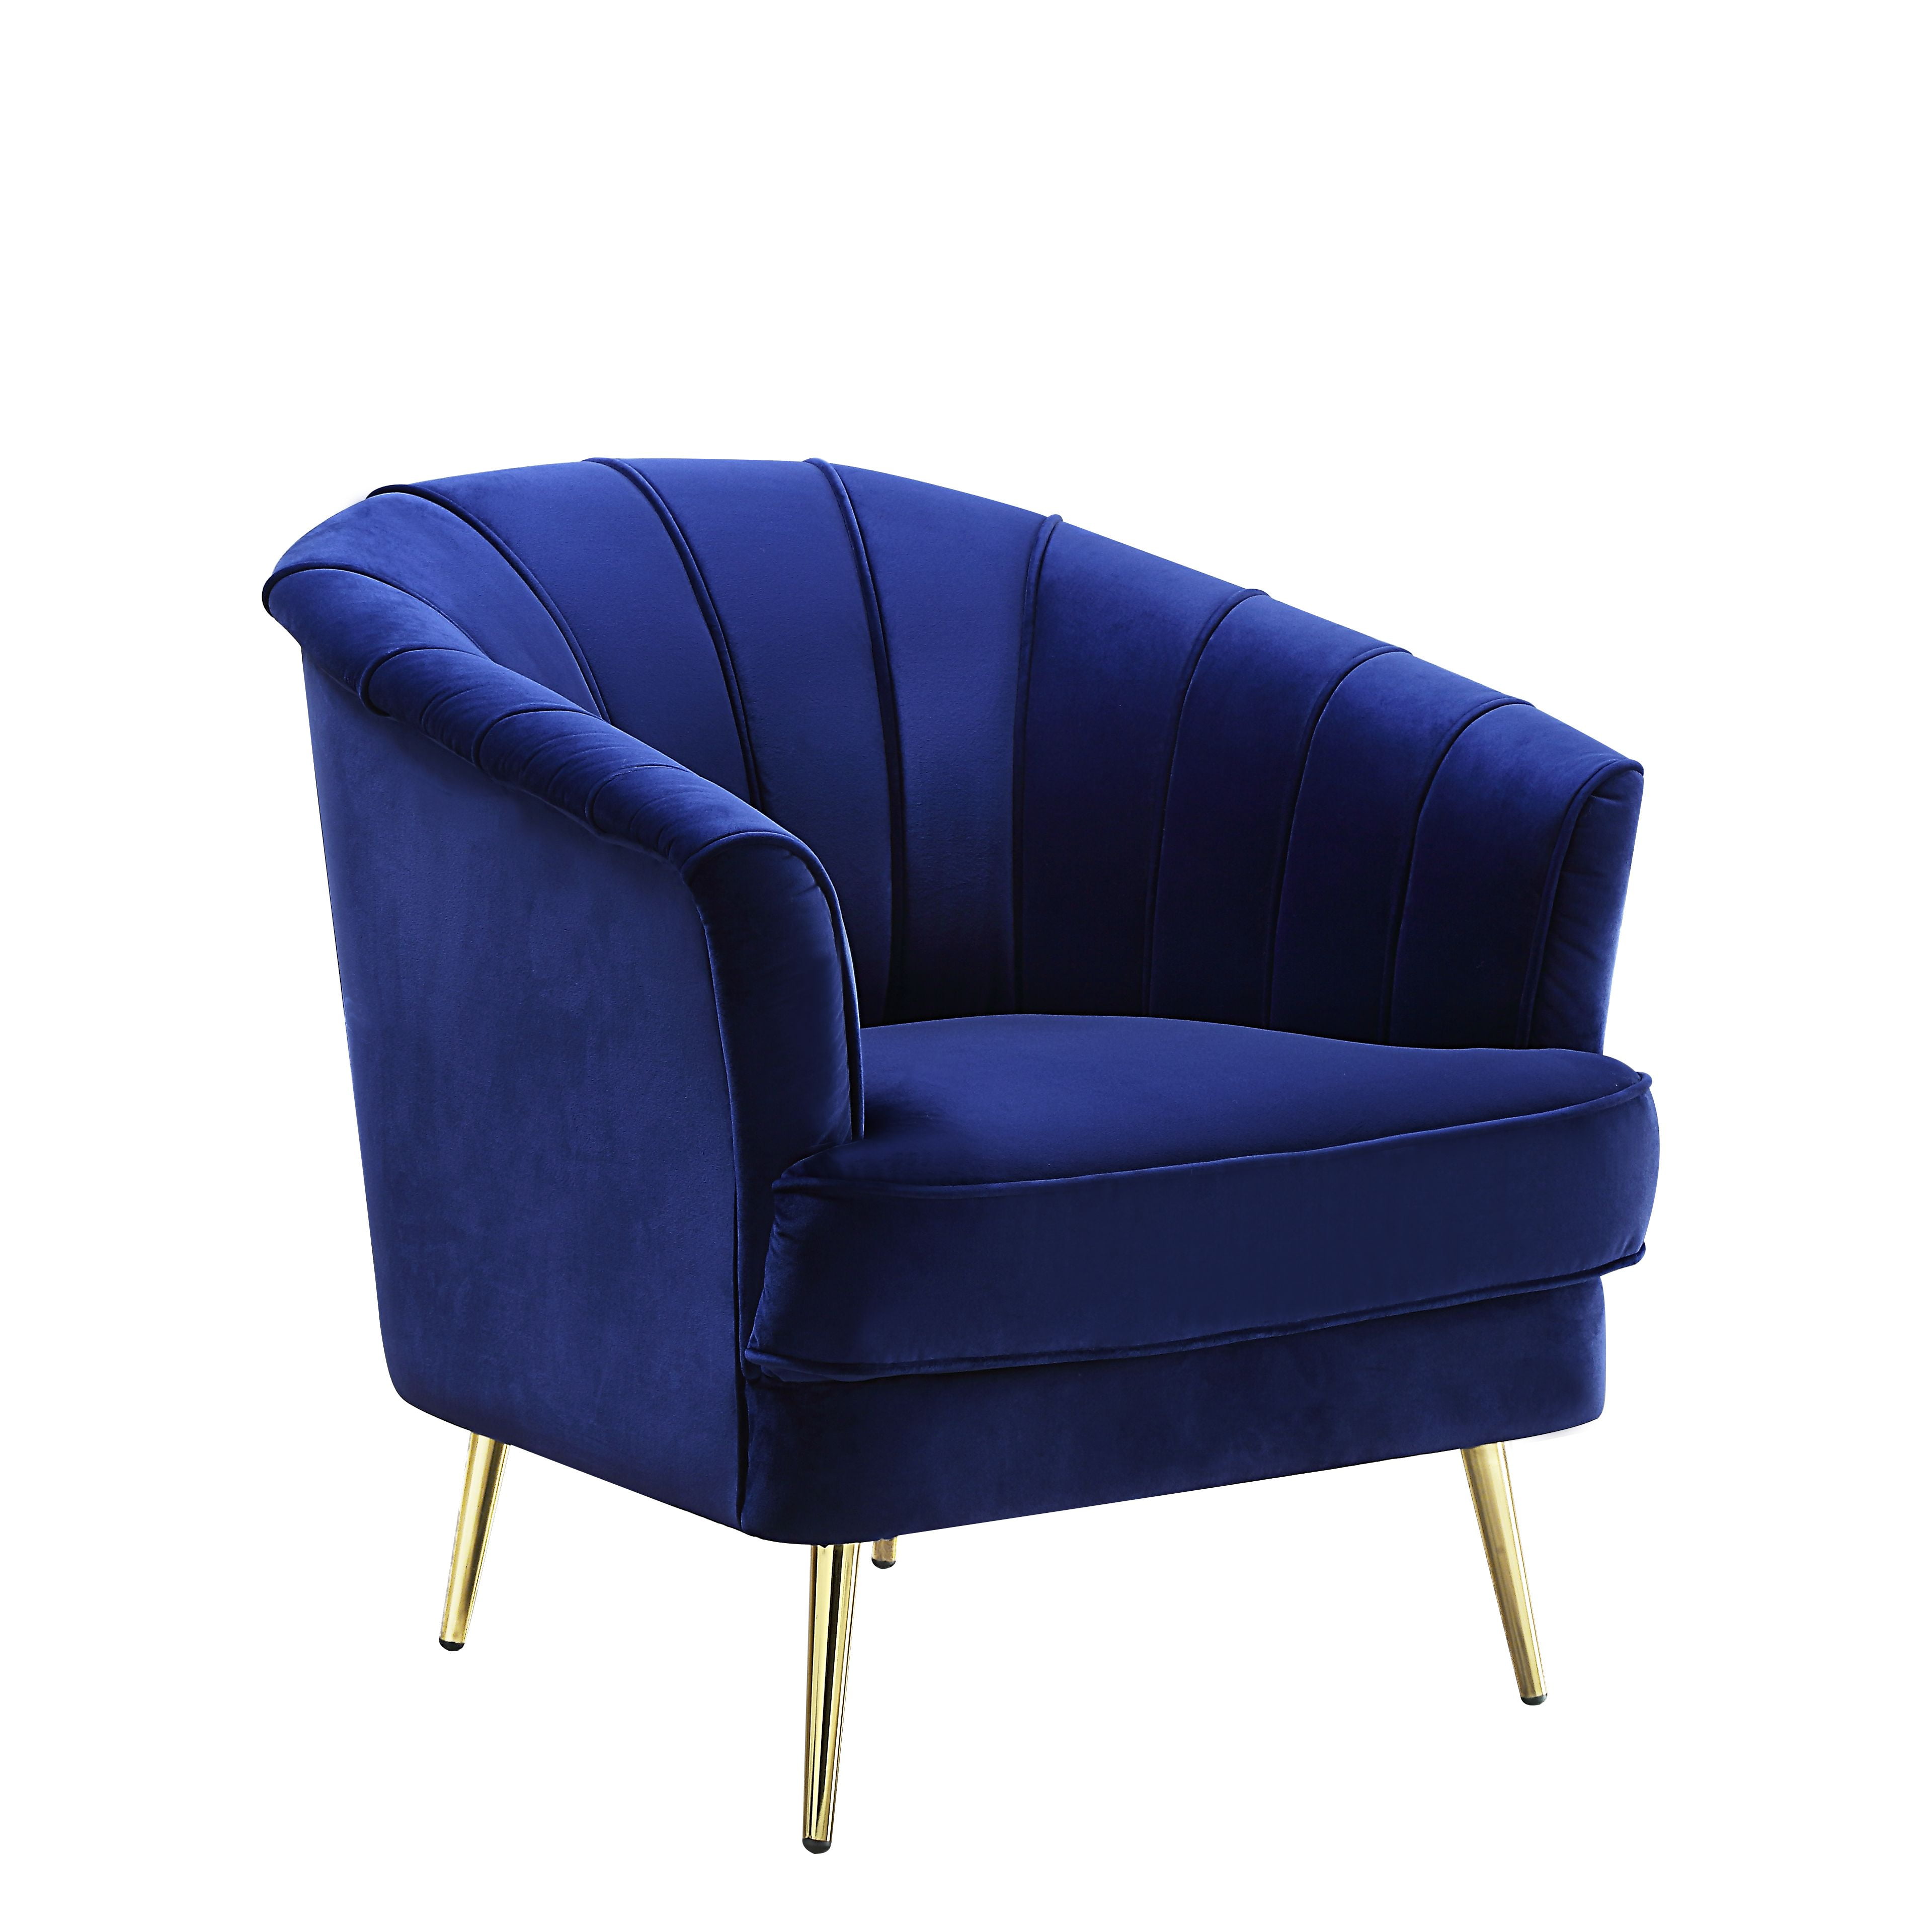 Picture of Acme Furniture LV00211 31 x 30 x 32 in. Eivor Accent Chair, Blue Velvet